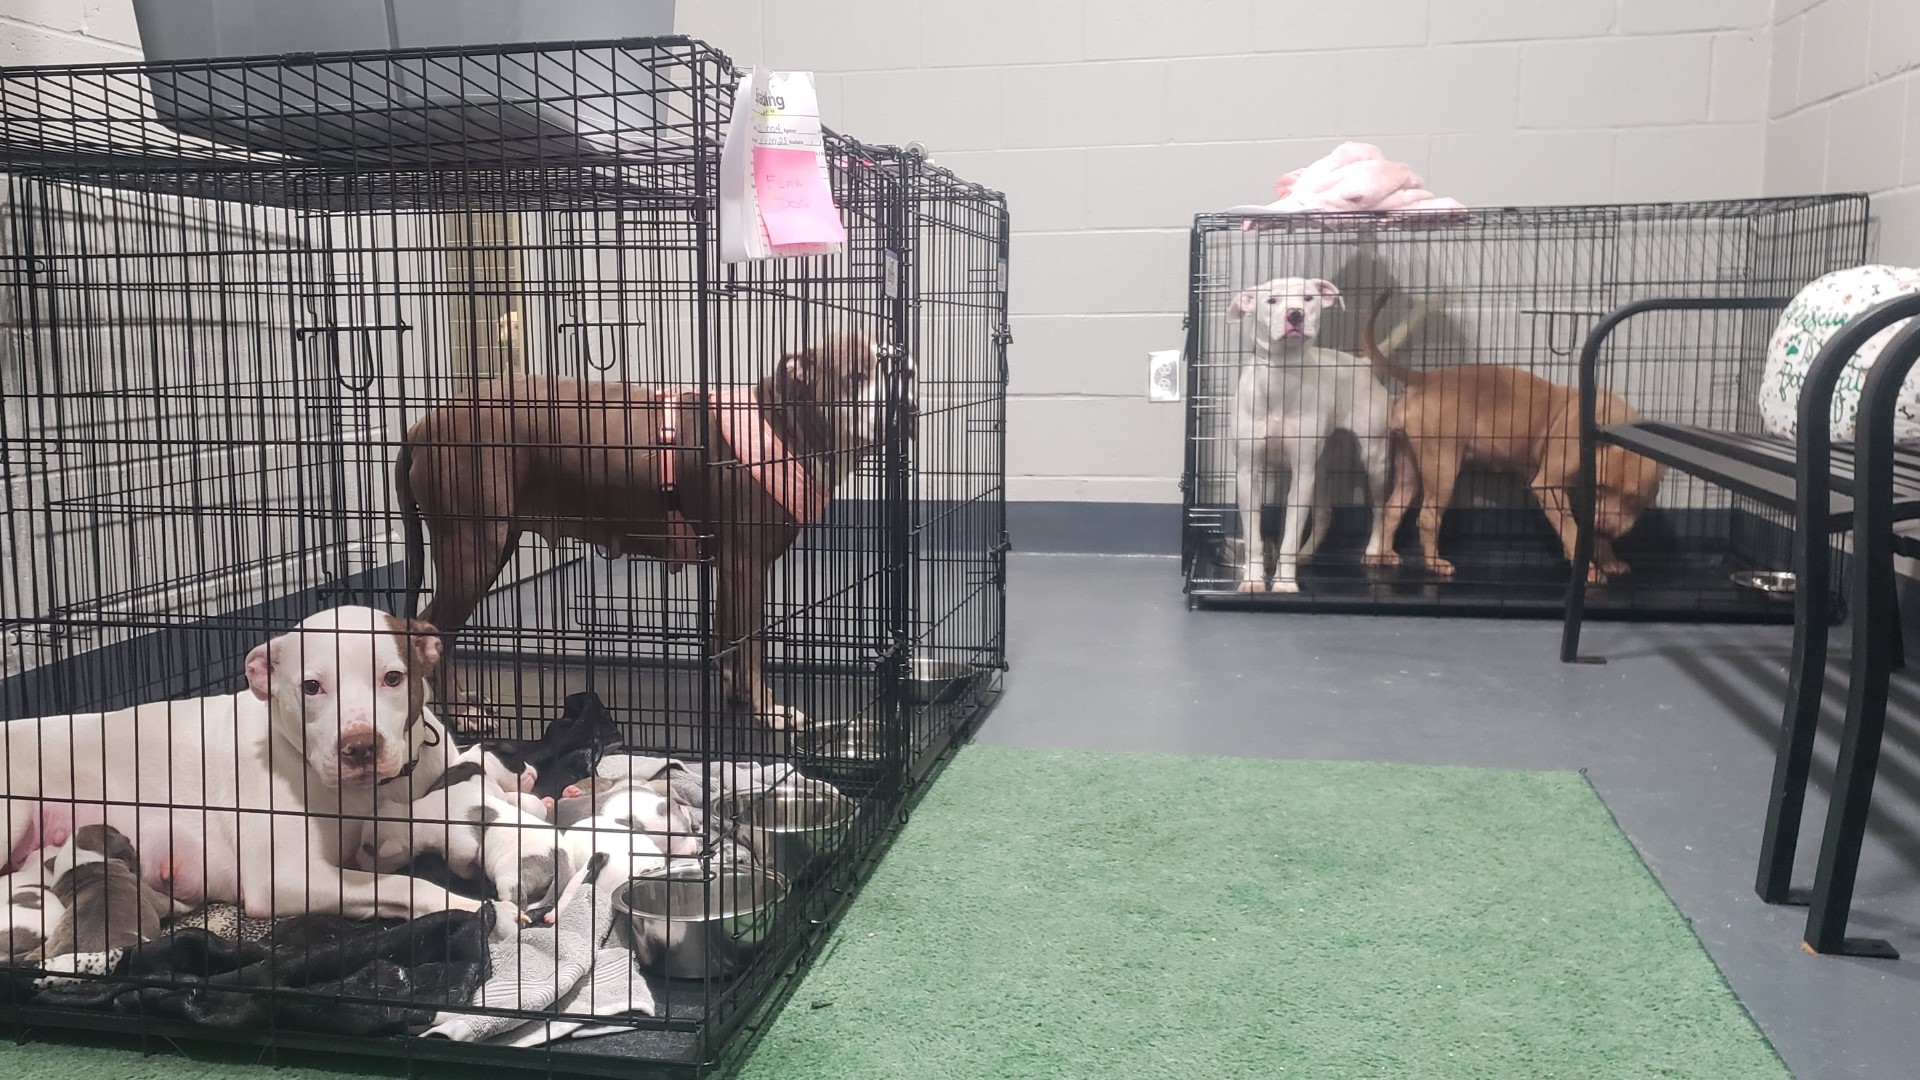 A partnership between the Federal Emergency Management Agency and the county animal shelter is allowing pet owners a place to temporarily house their animals.